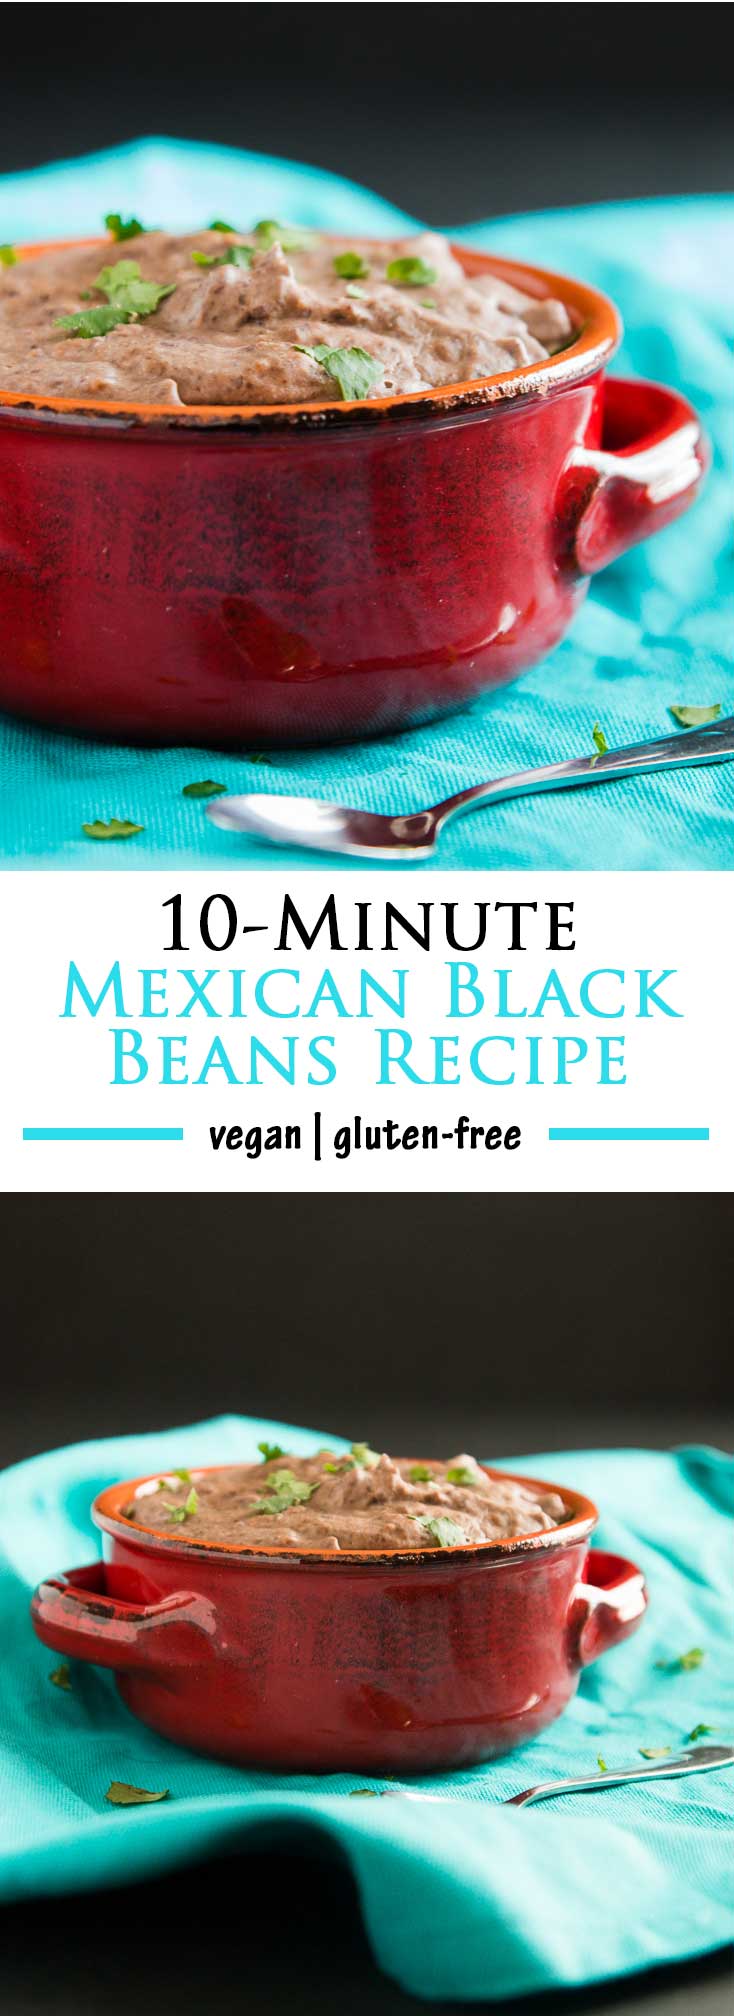 Take your go-to meal up a notch by making these healthy vegan 10-Minute Mexican Black Beans Recipe! No extra time, ALL the extra flavor and deliciousness! #vegan #glutenfree | vegetariangastronomy.com